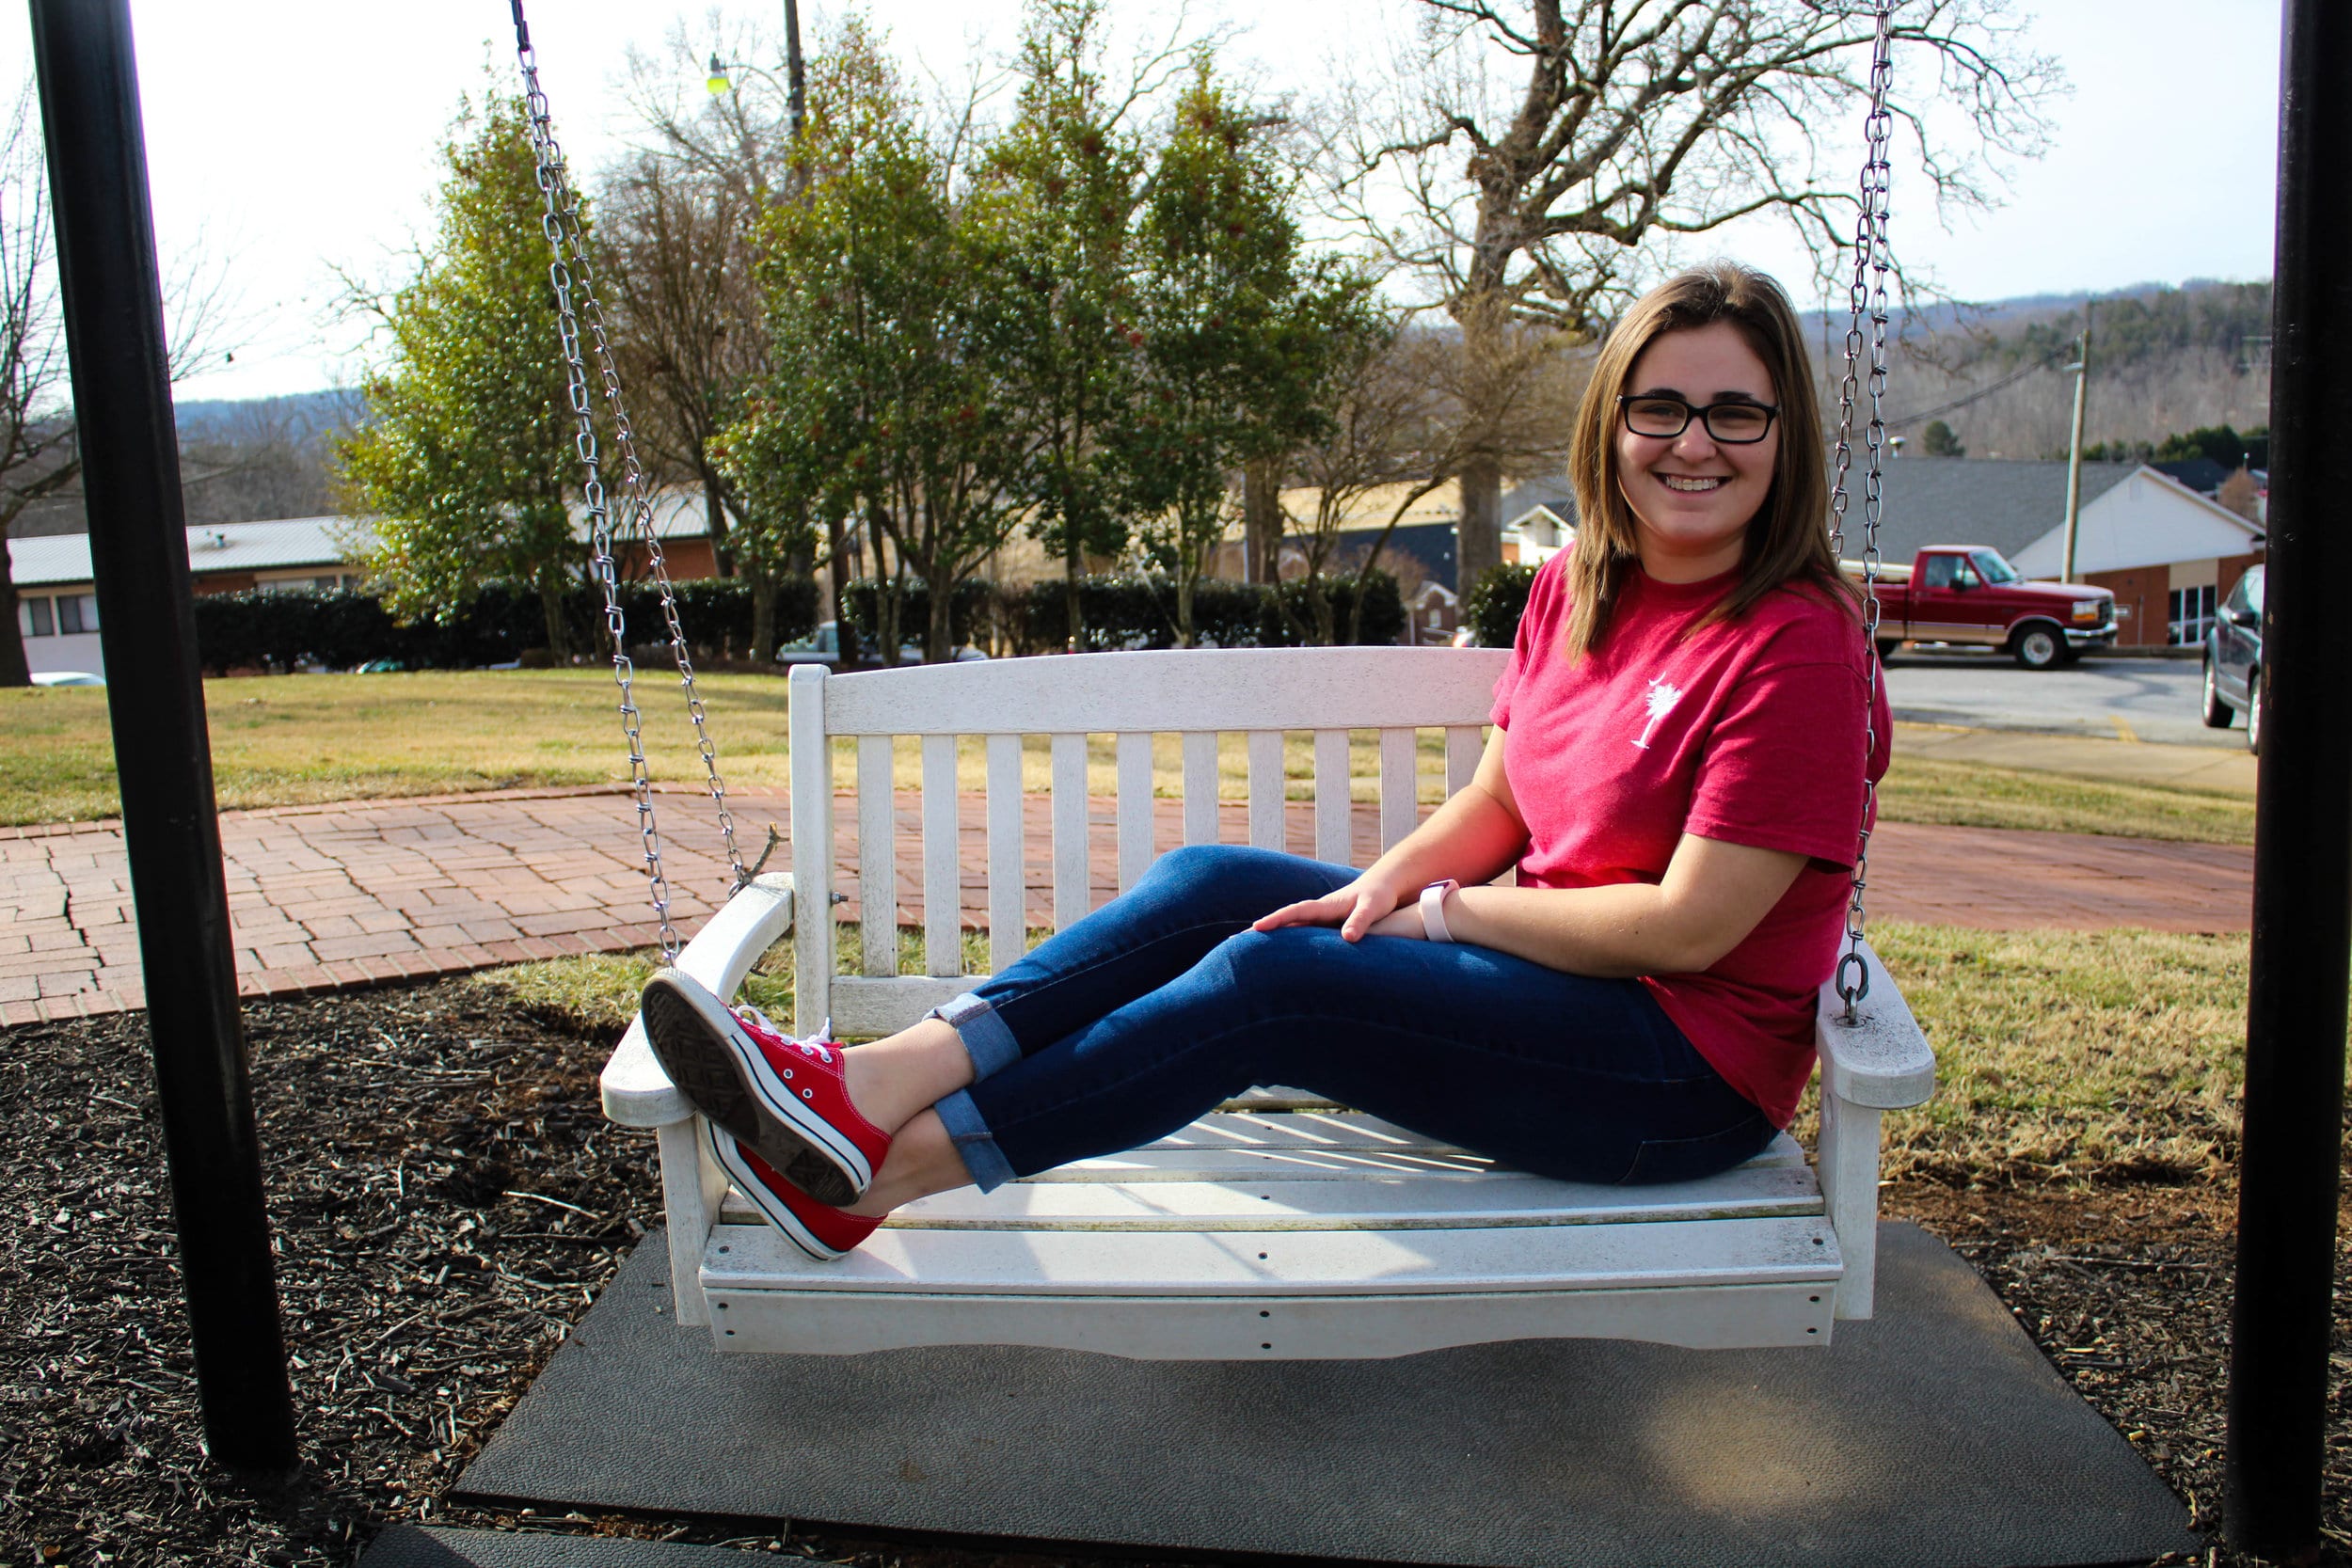 Marissa Holst, a freshman early childhood education major, exhibits her encouragement for the awareness of heart disease by wearing red as she swings outside of Neves.